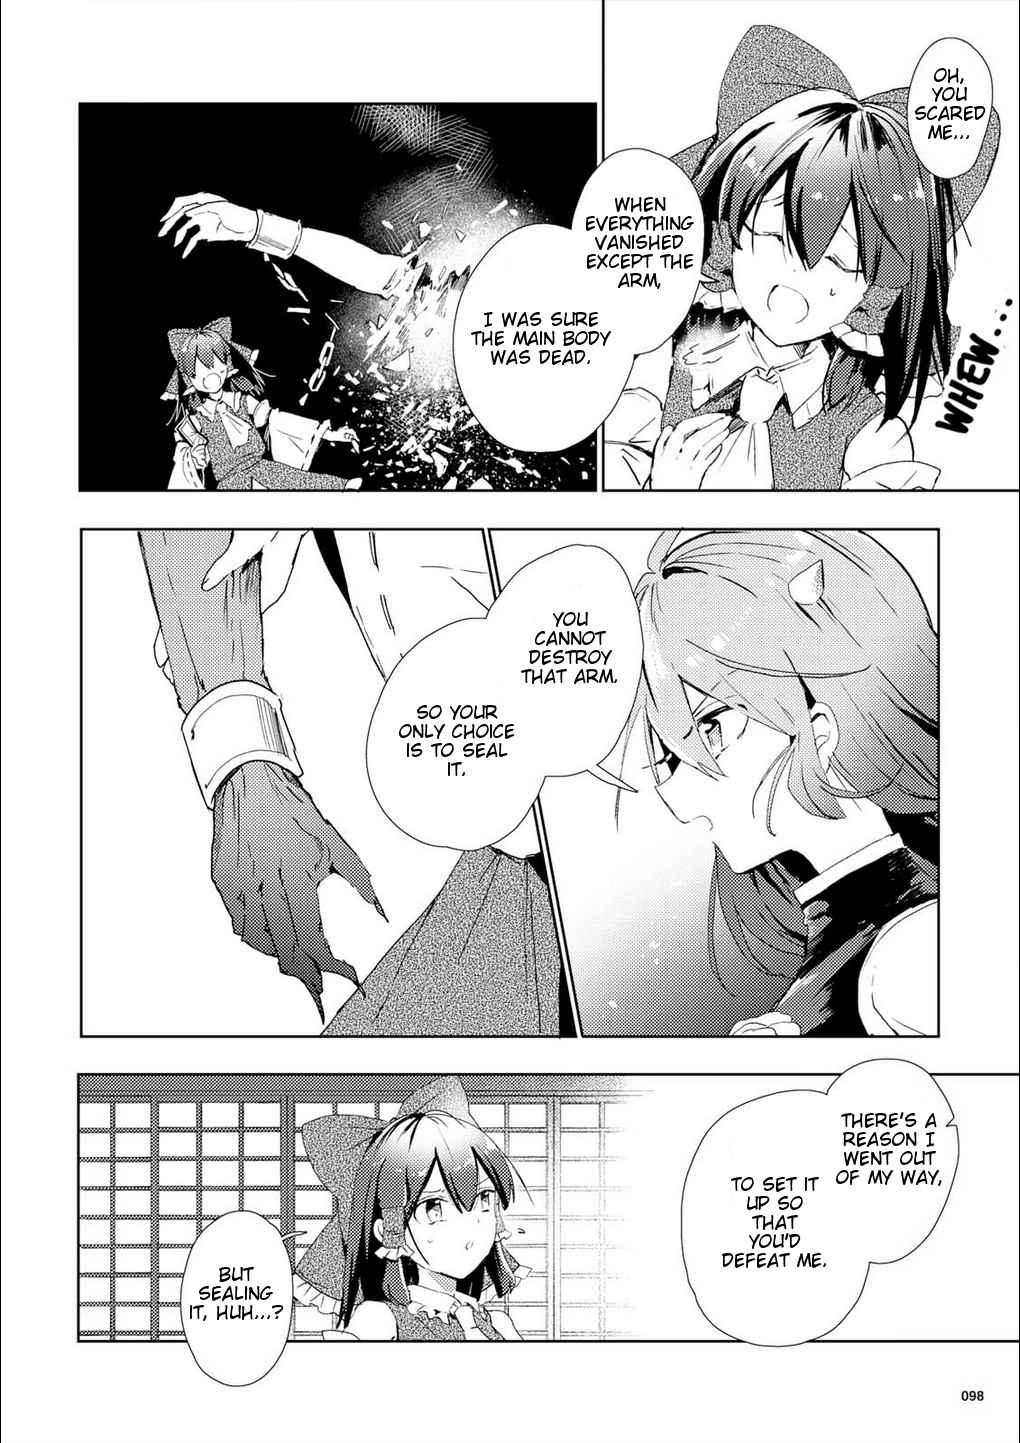 Touhou Ibara Kasen ~ Wild and Horned Hermit. Vol. 10 Ch. 50 The Horned, One Armed Hermit